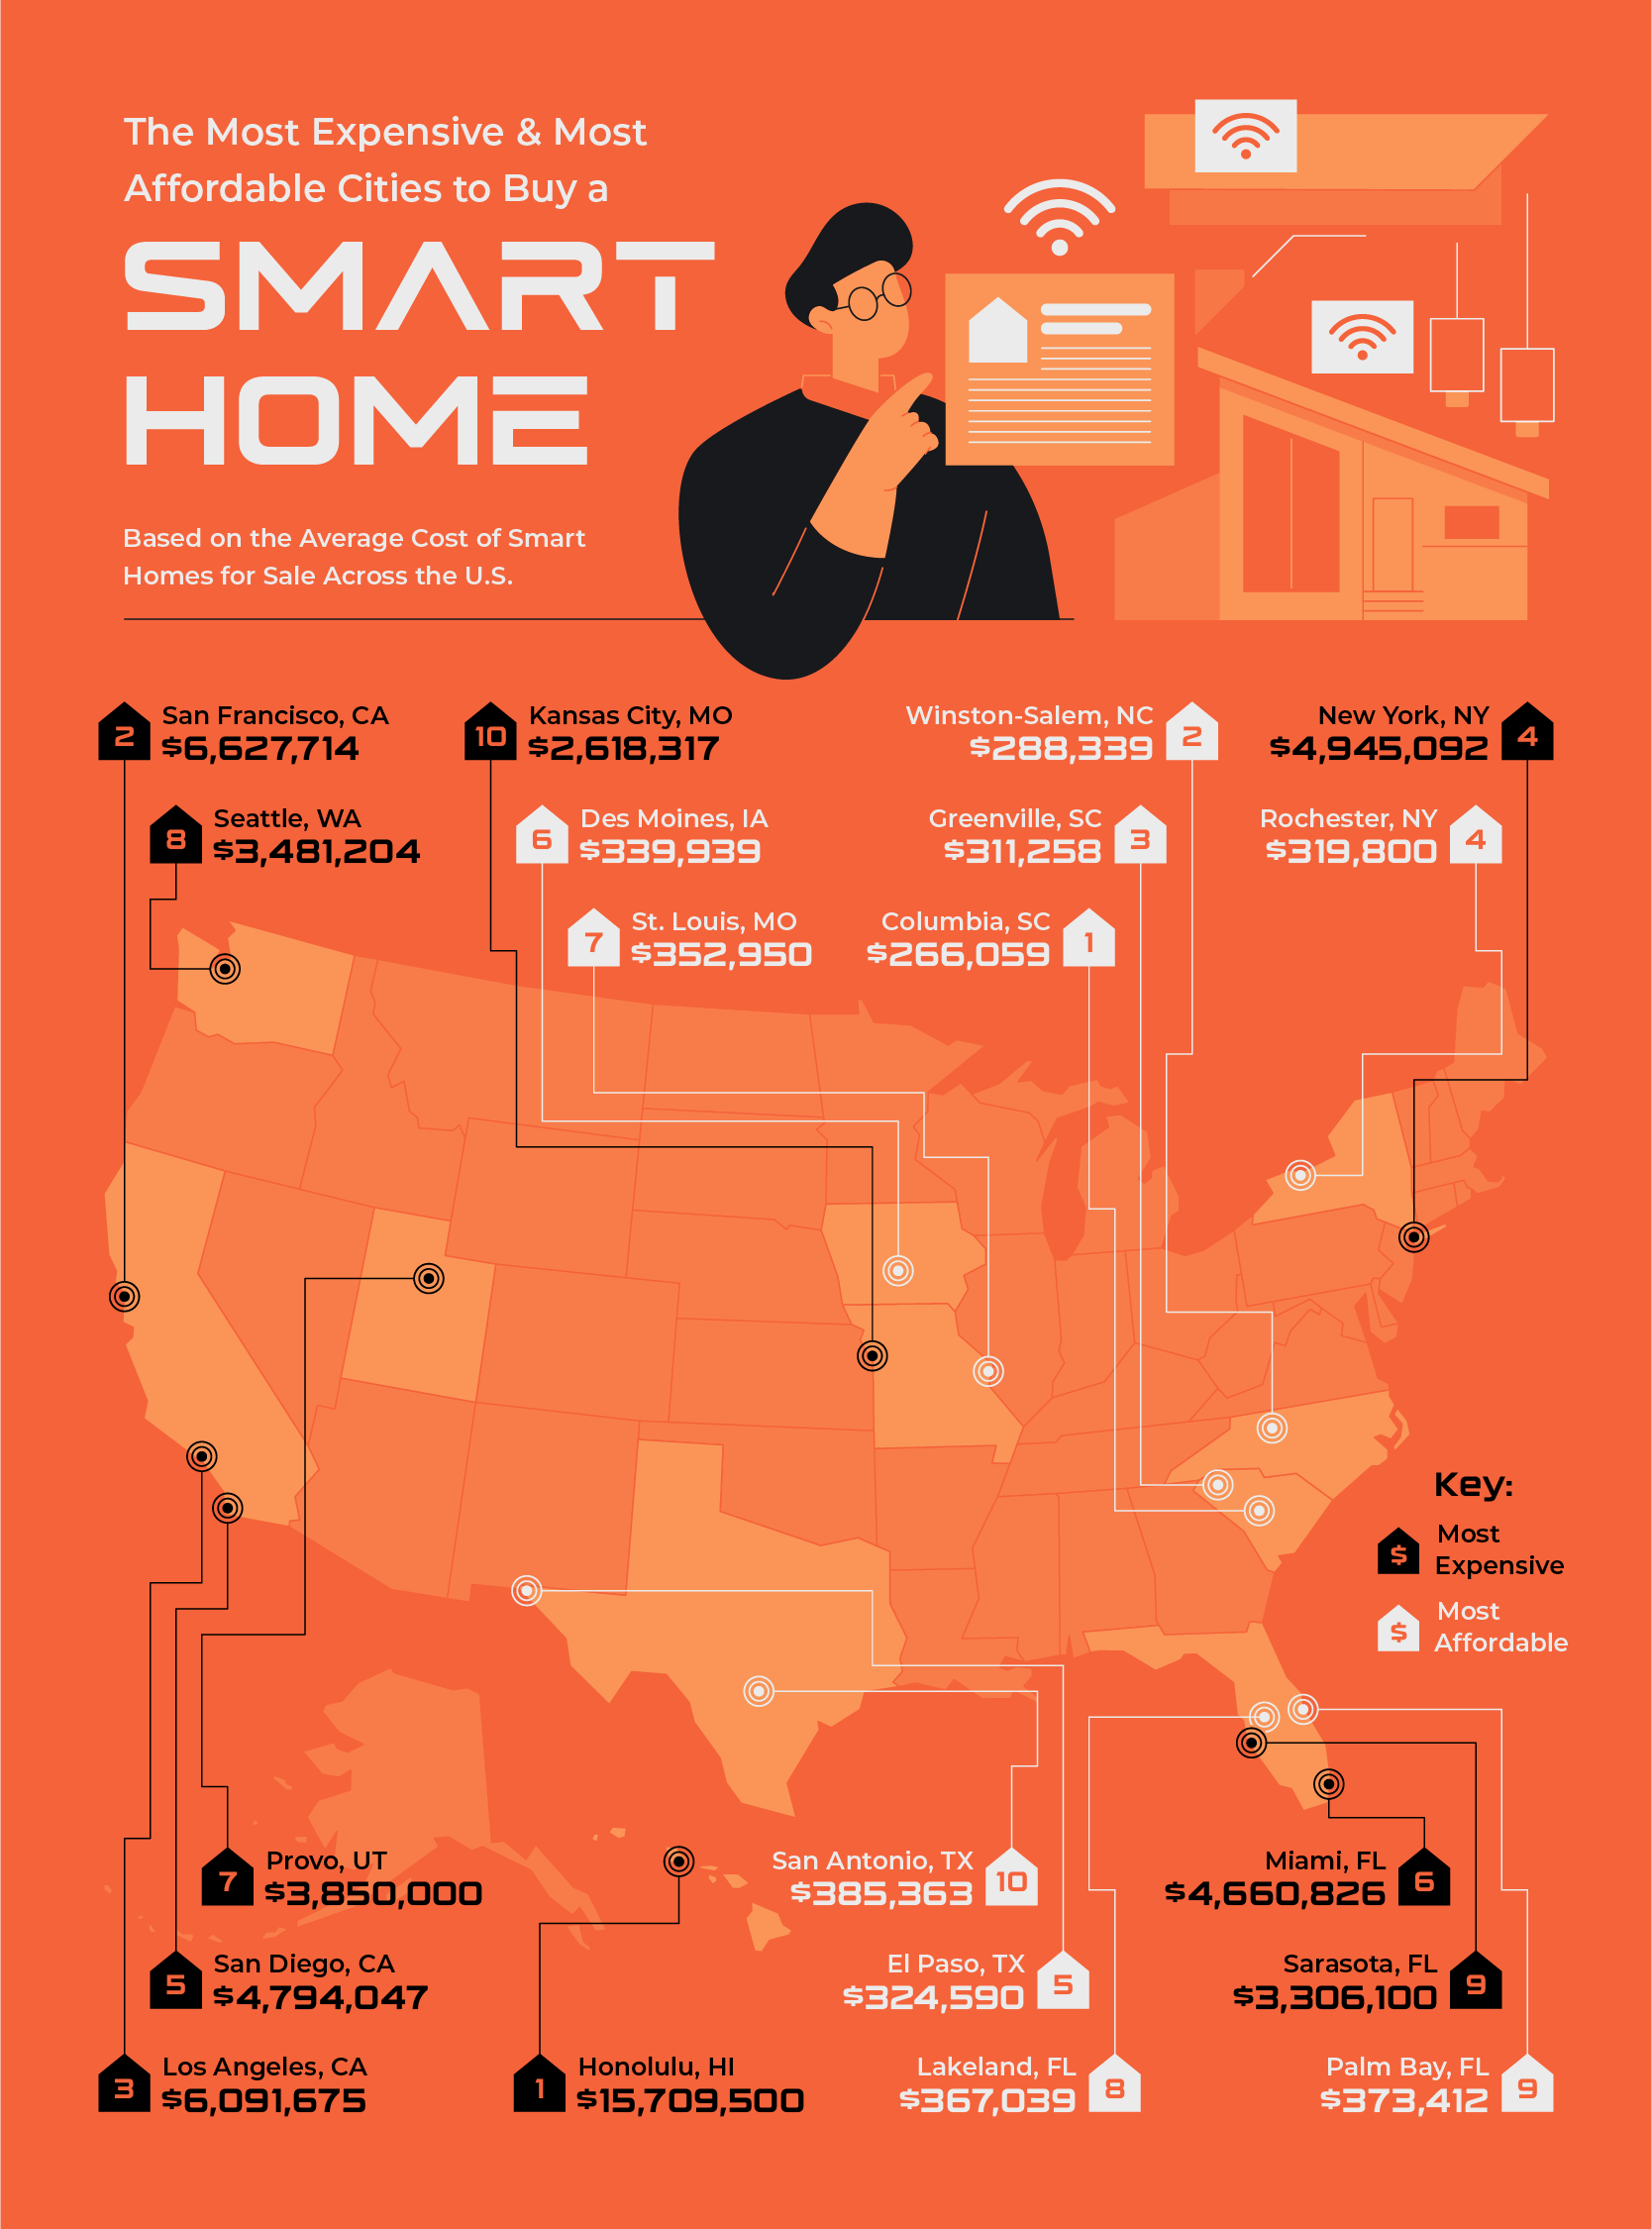 A map of the U.S. highlighting the cities with the most and least expensive smart homes.